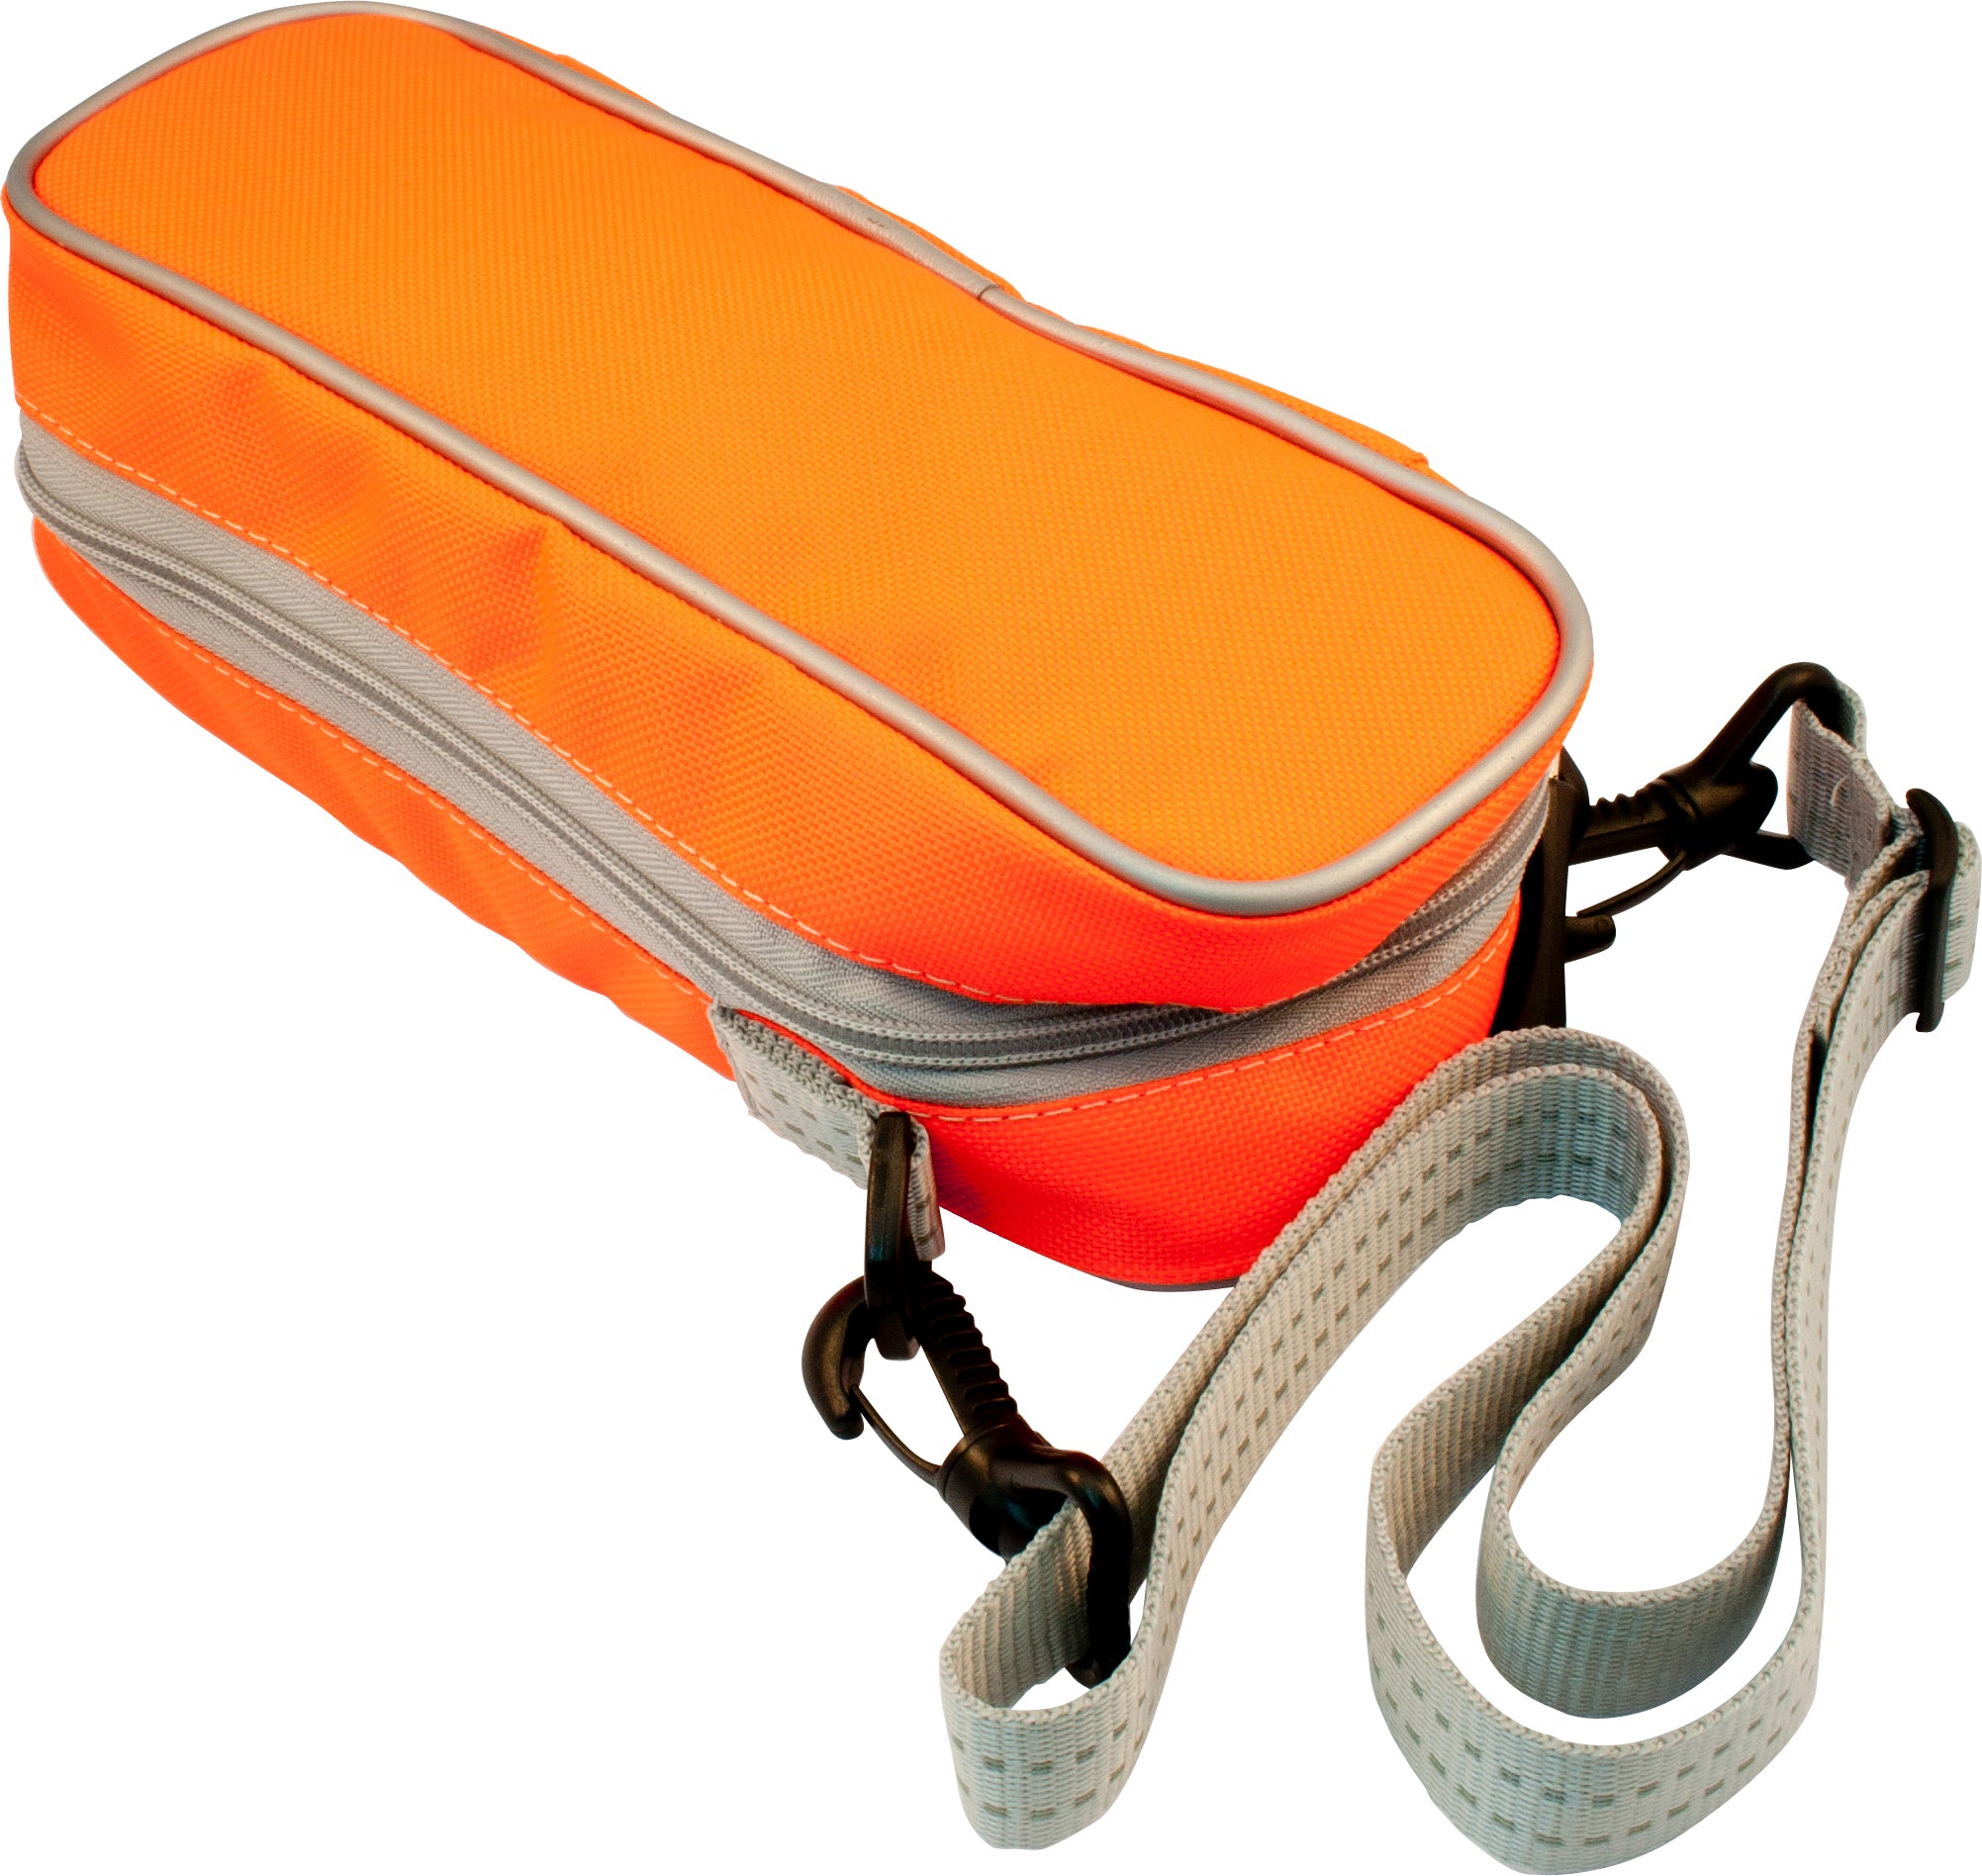 Carrying case for VM-2500